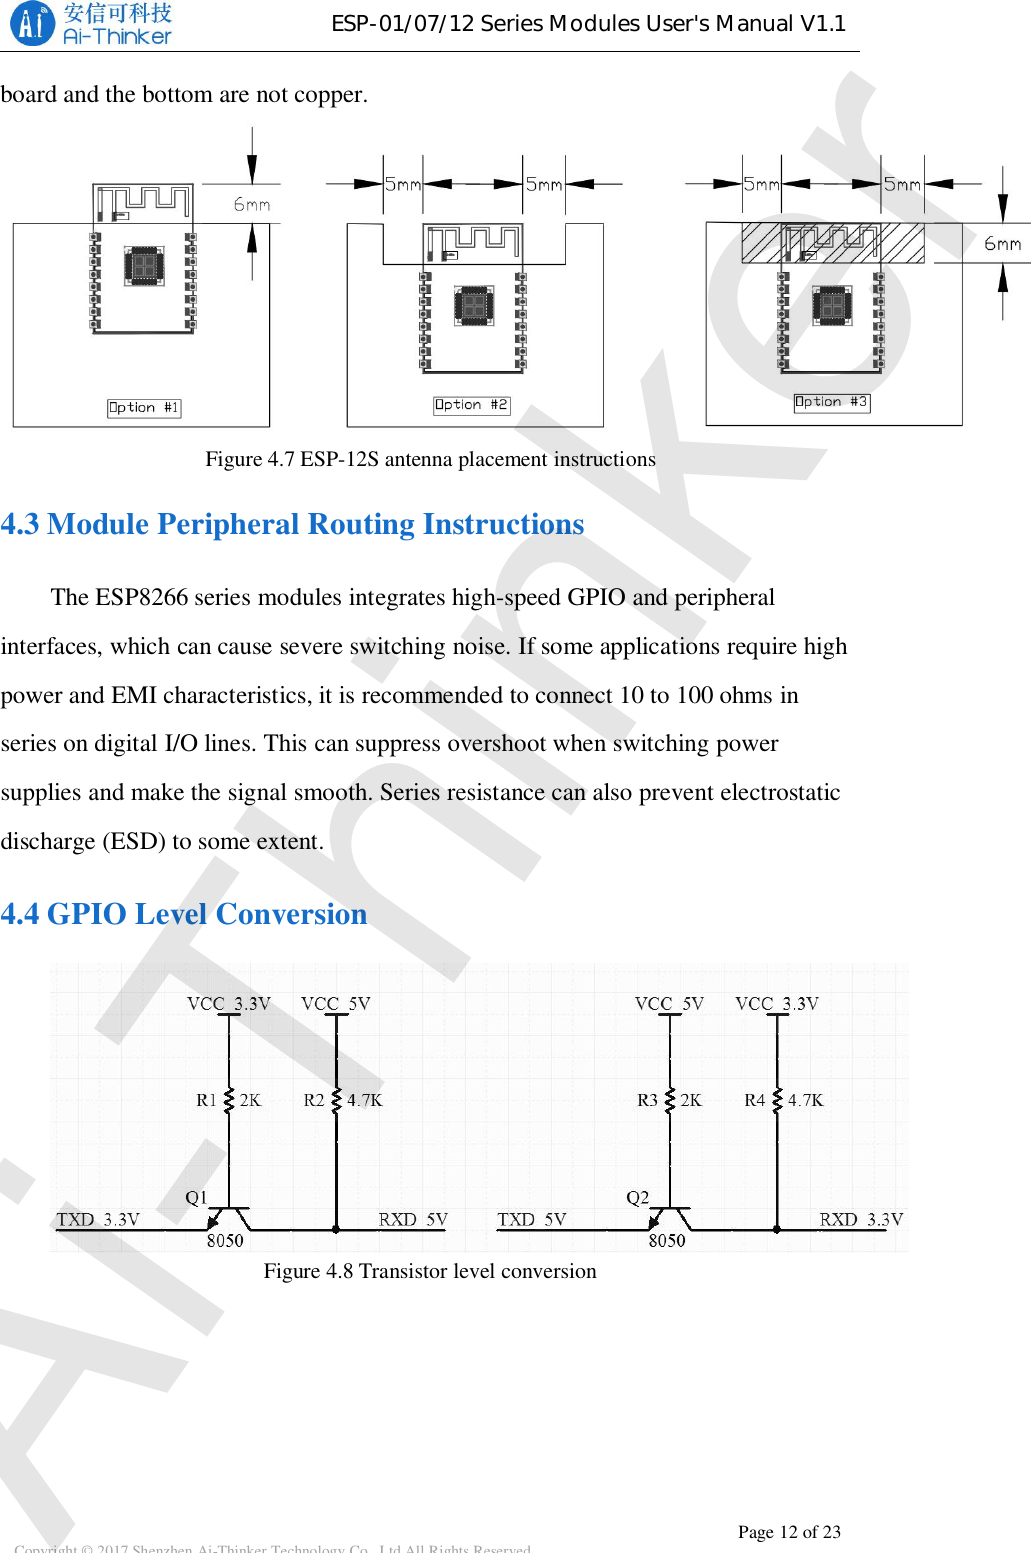 ESP-01/07/12SeriesModulesUser&apos;sManualV1.1Copyright © 2017 Shenzhen Ai-Thinker Technology Co., Ltd All Rights Reserved Page 12 of 23board and the bottom are not copper.Figure 4.7 ESP-12S antenna placement instructions4.3 Module Peripheral Routing InstructionsThe ESP8266 series modules integrates high-speed GPIO and peripheralinterfaces, which can cause severe switching noise. If some applications require highpower and EMI characteristics, it is recommended to connect 10 to 100 ohms inseries on digital I/O lines. This can suppress overshoot when switching powersupplies and make the signal smooth. Series resistance can also prevent electrostaticdischarge (ESD) to some extent.4.4 GPIO Level ConversionFigure 4.8 Transistor level conversionAi-Thinker